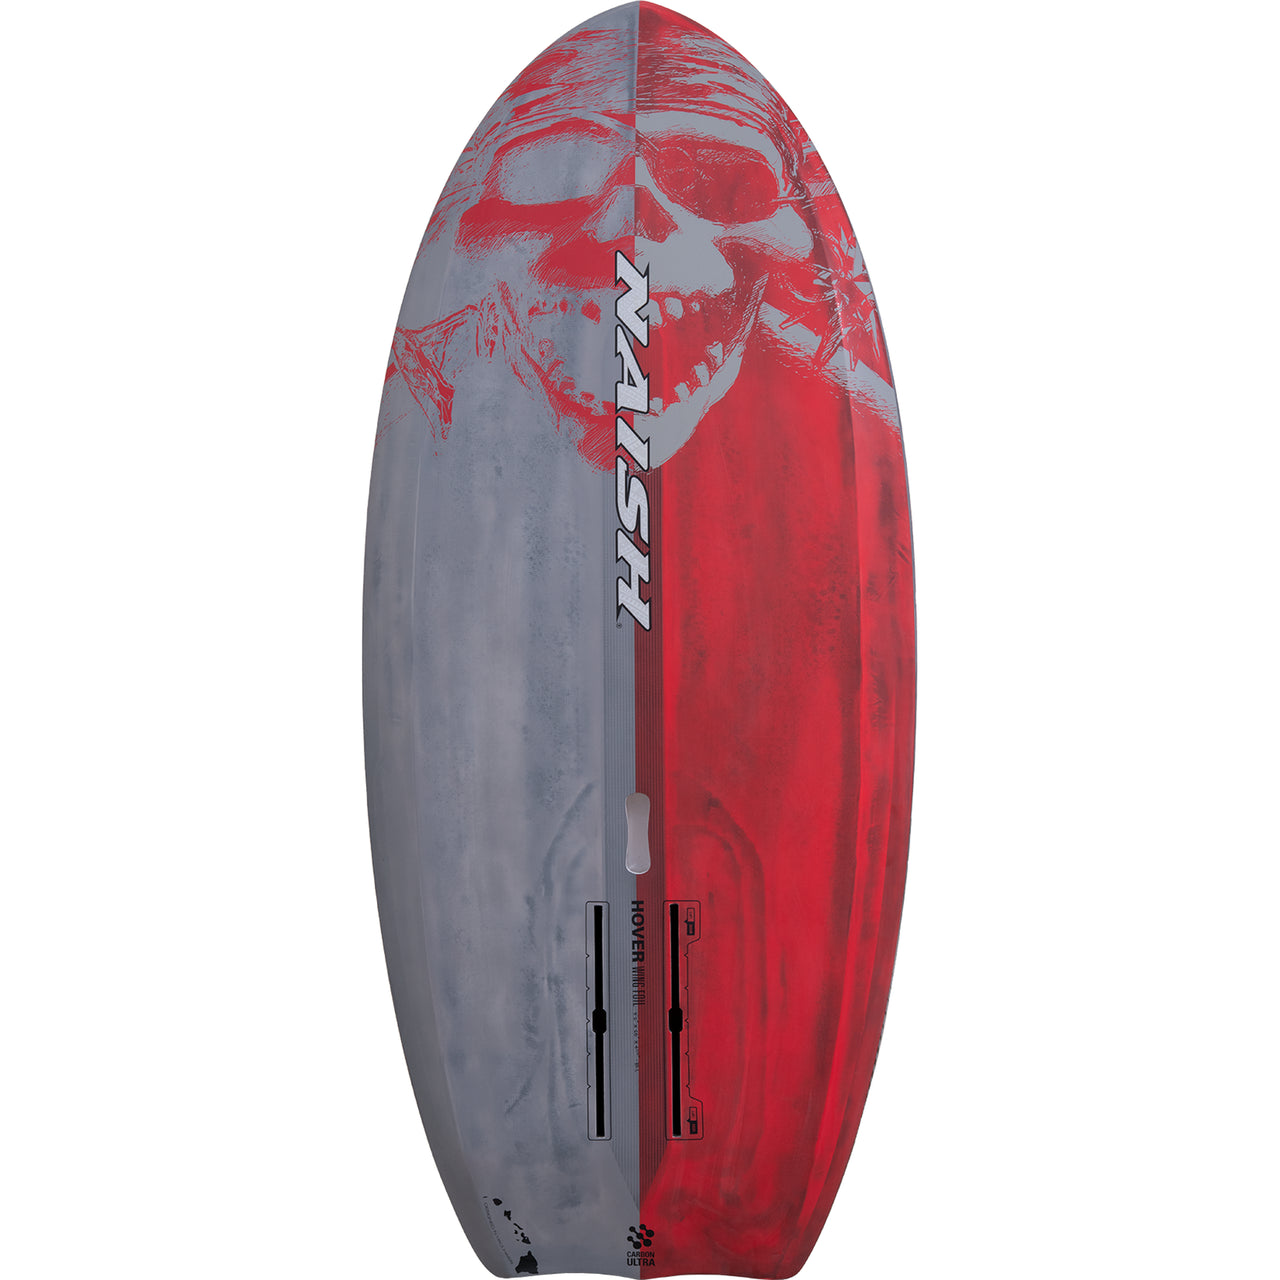 Naish Hover Wing Foil Carbon Ultra LE Wing-Surfing-Foil SUP 95 Liter